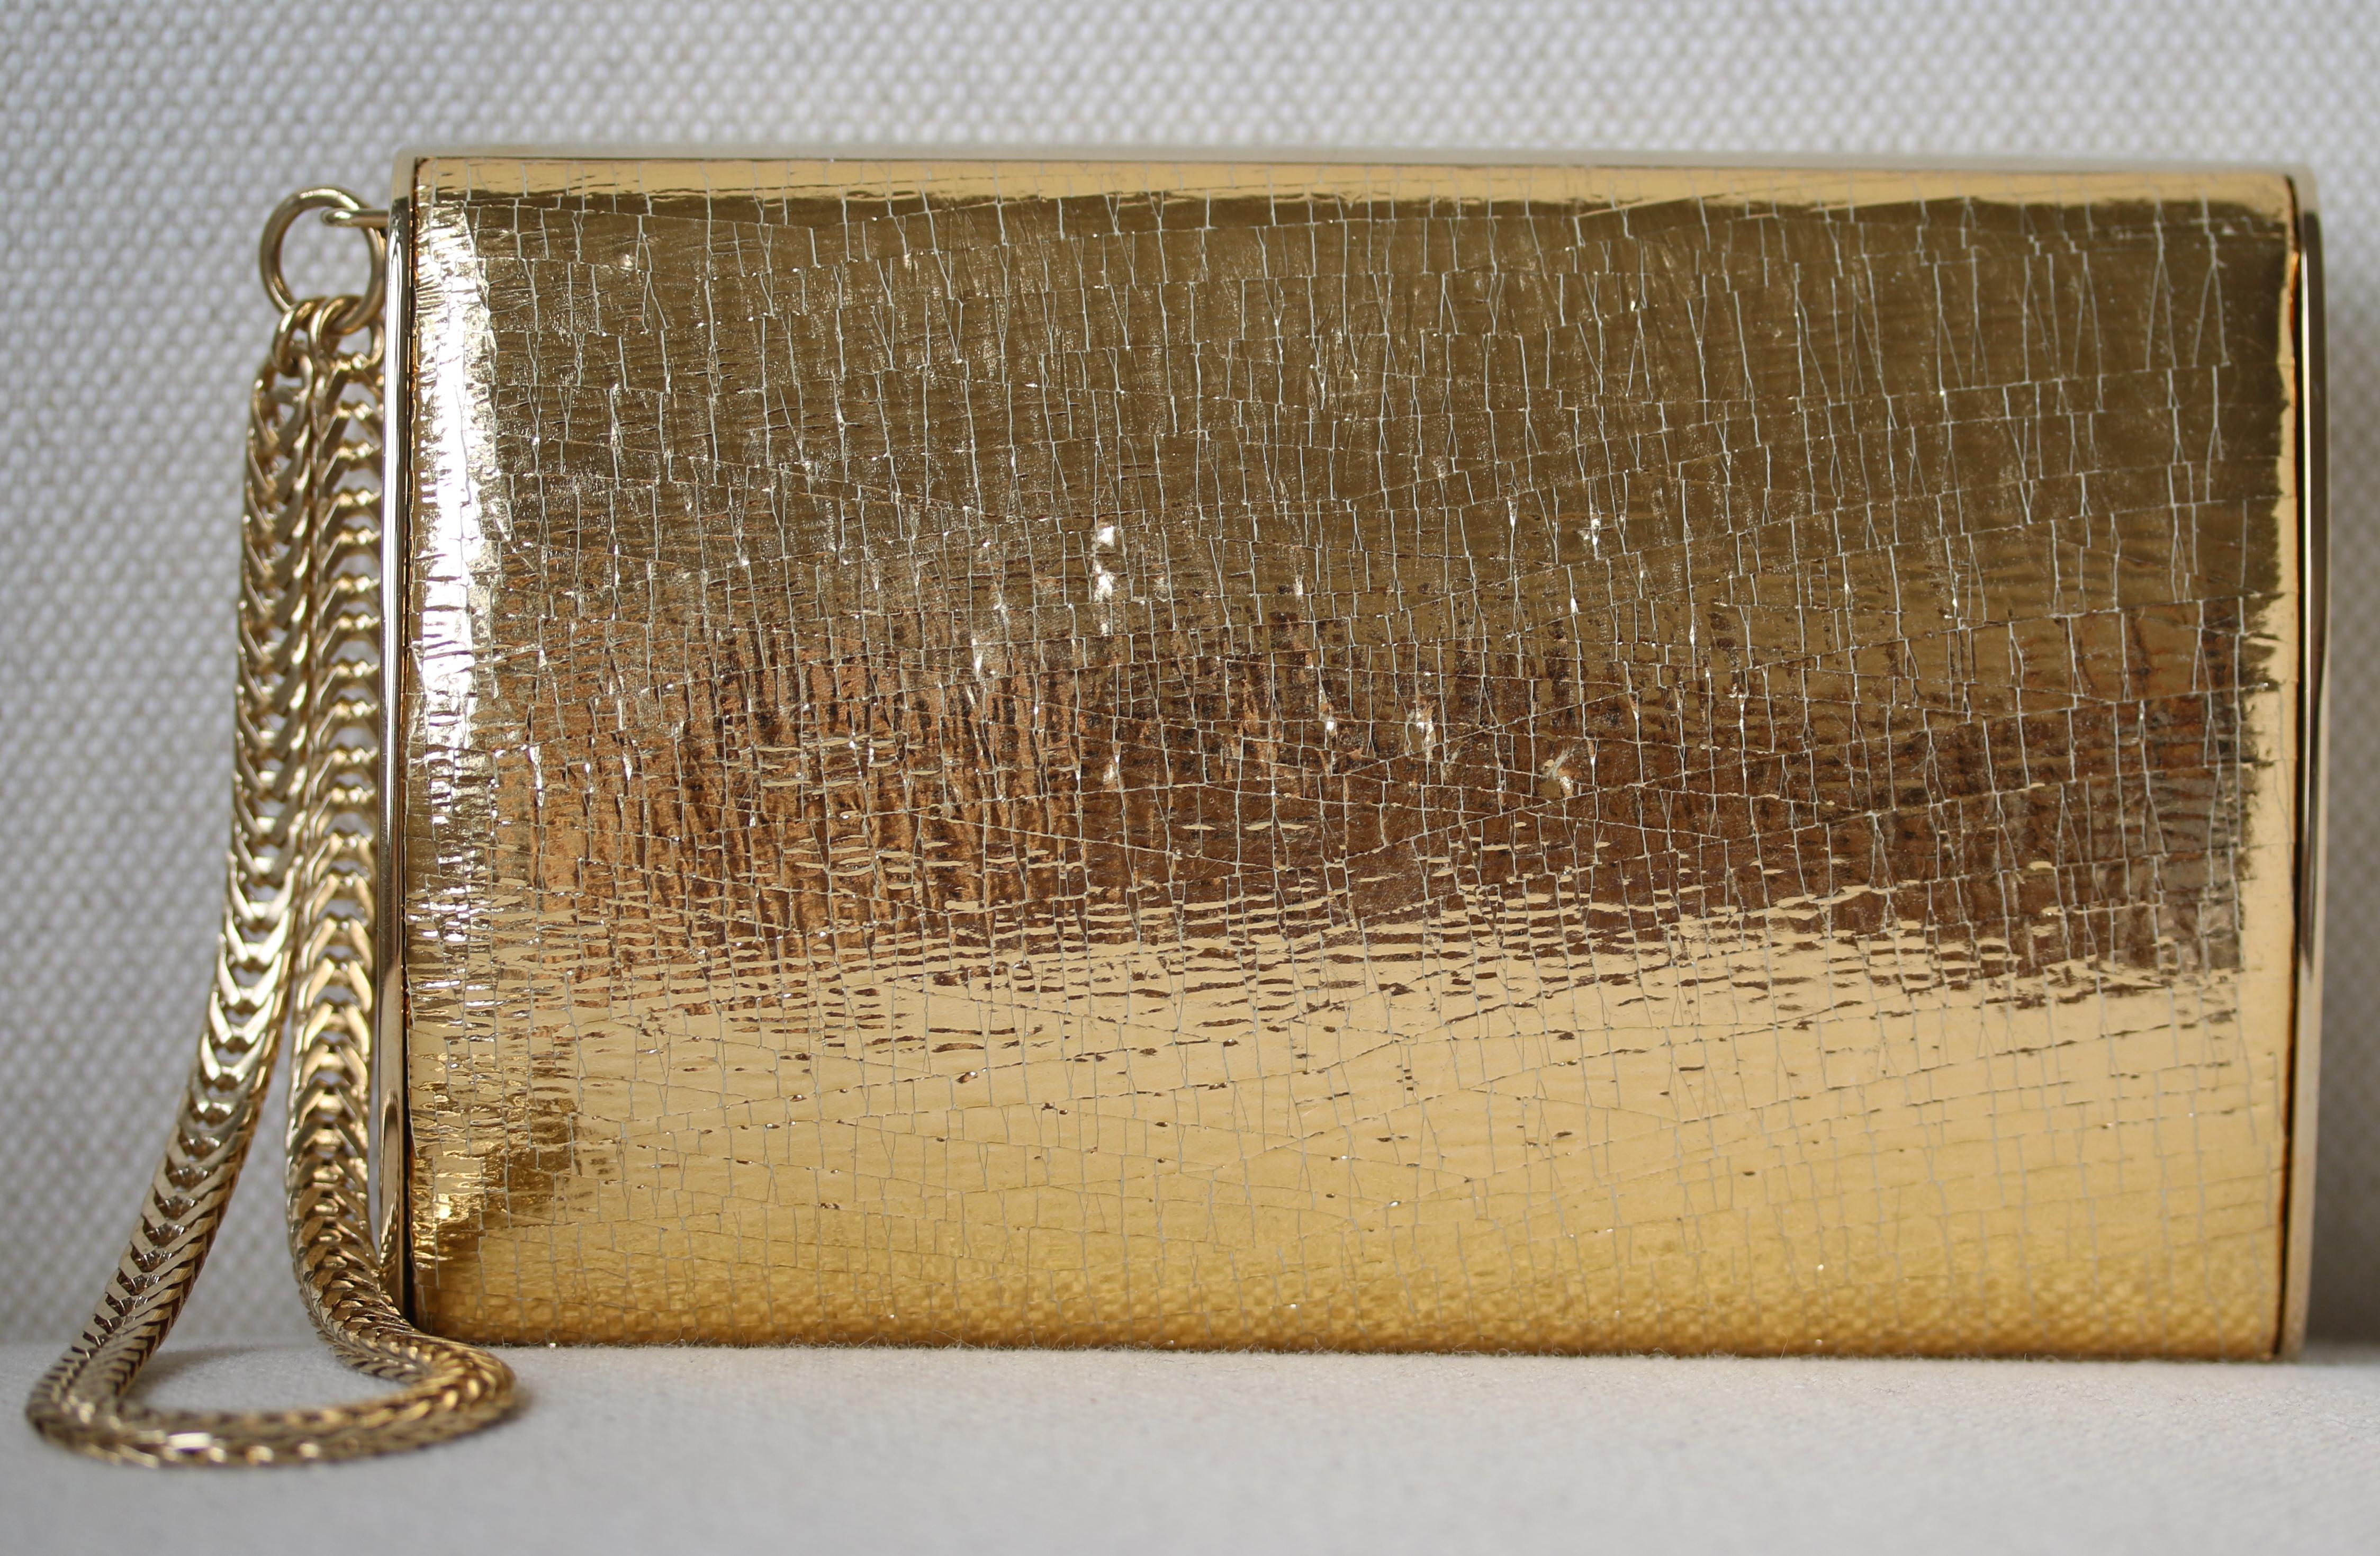 Jimmy Choo gold leather and metal clutch with wristlet chain. Satin-lined interior. Made in Italy.

Dimensions: Approx. D 4 cm  x H 10 cm  x W 15 cm 

Condition: Excellent pre-owned condition, no sign of wear except superficial scratching to